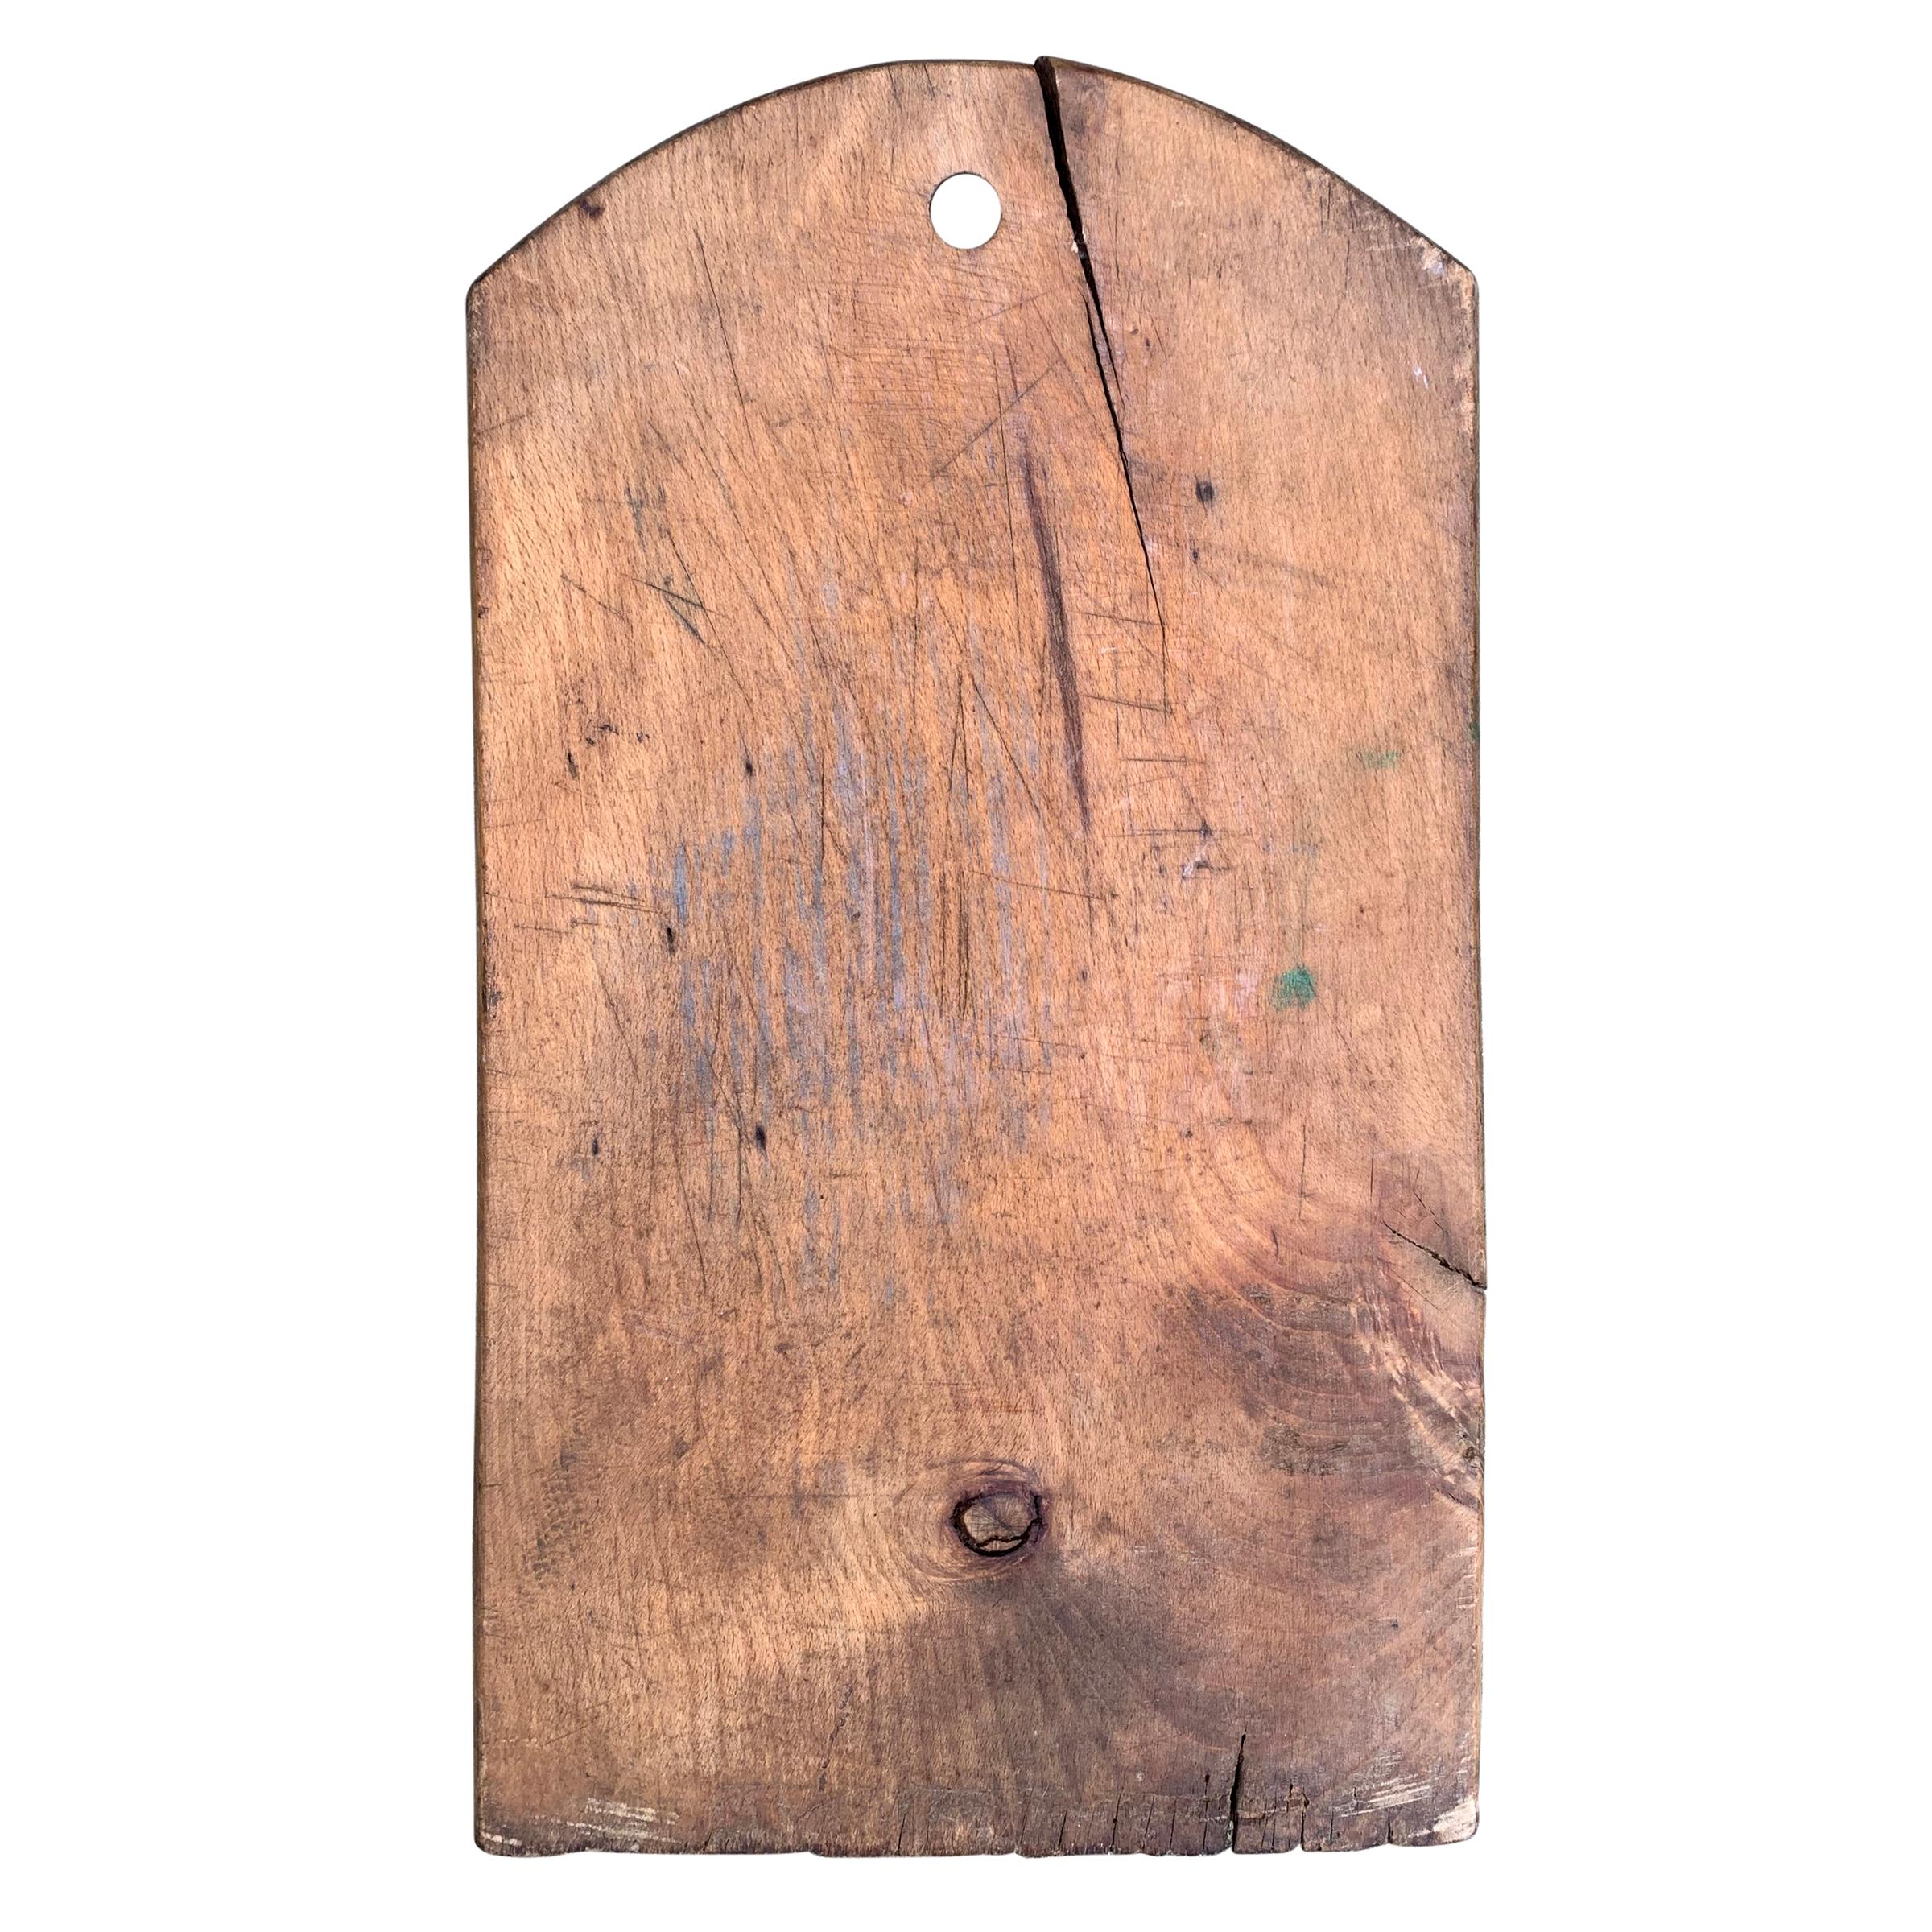 A wonderfully worn early 20th century Italian cutting board with a beautiful patina. All that’s missing is a selection of cheeses, charcuterie, and your guests.